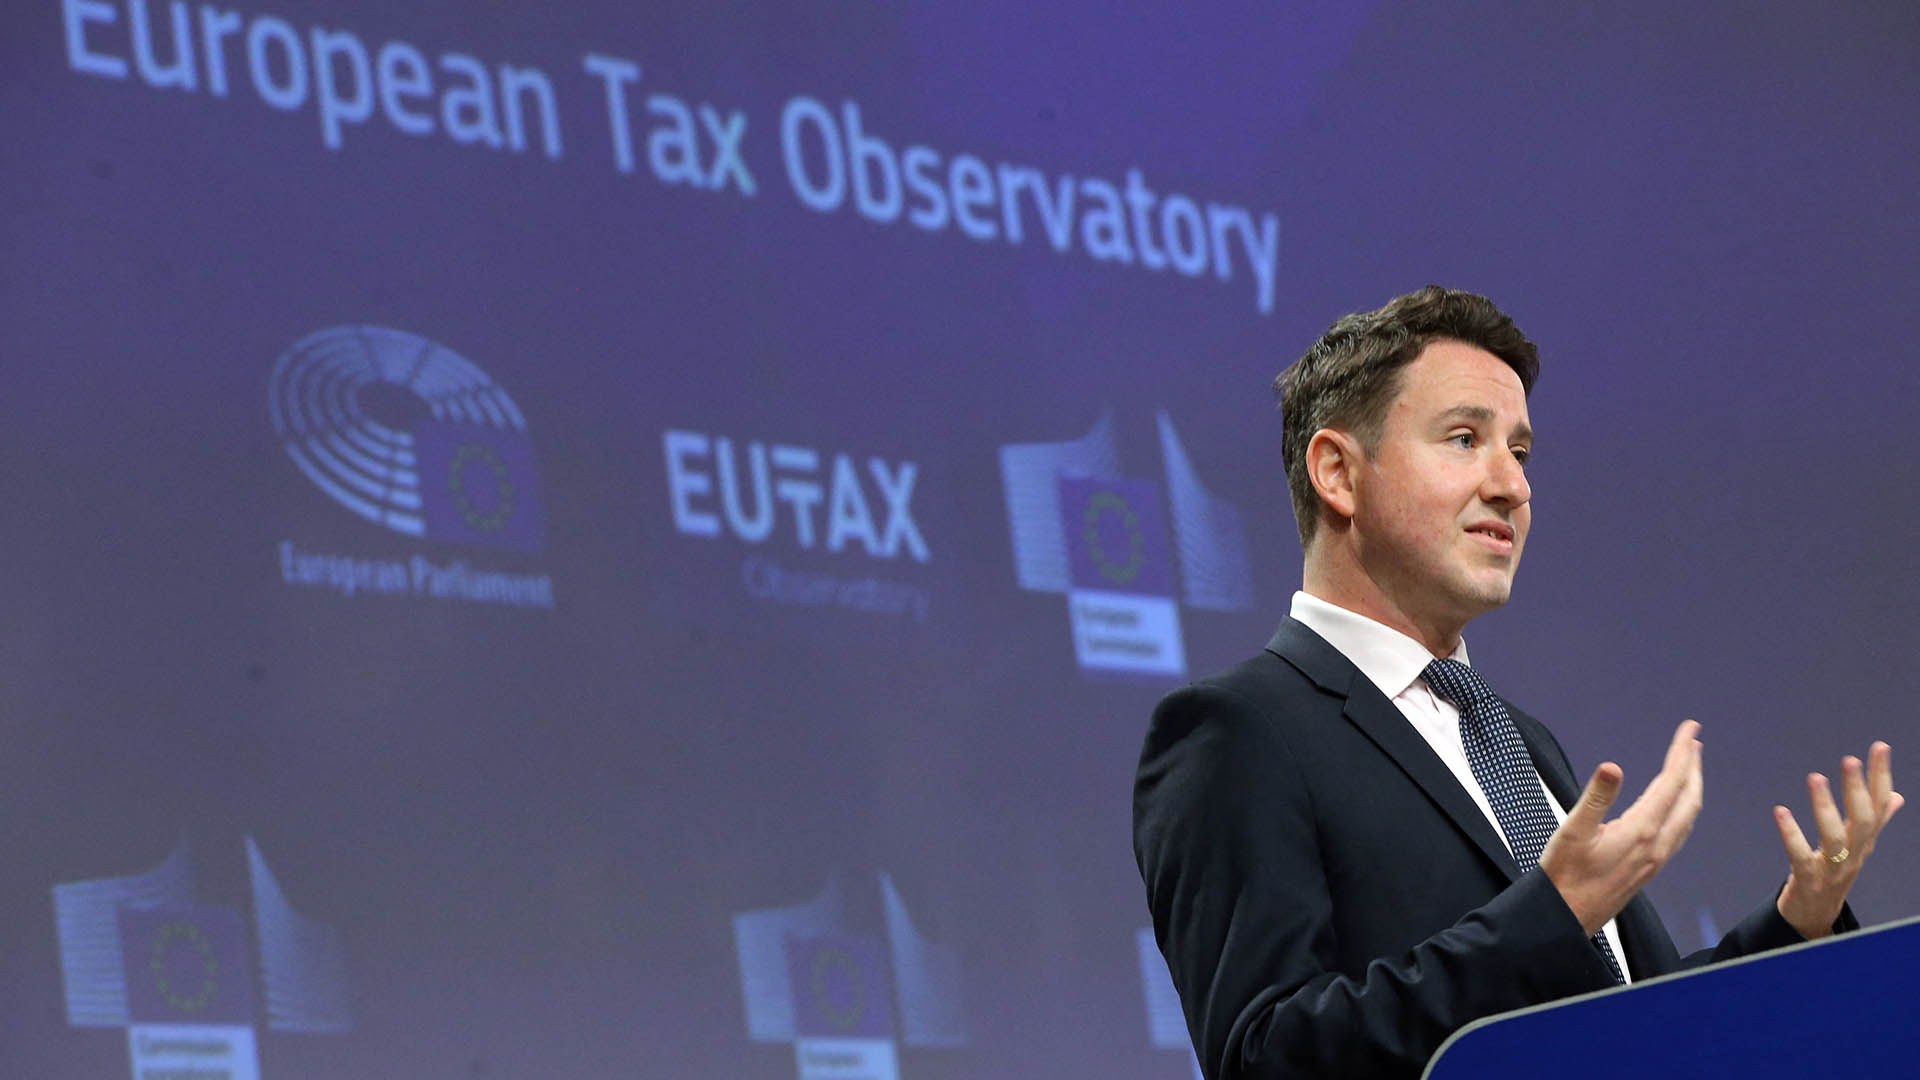 Gabriel Zucman, wearing a suit, speaks at a lecturn in front of a sign reading European Tax Observatory.